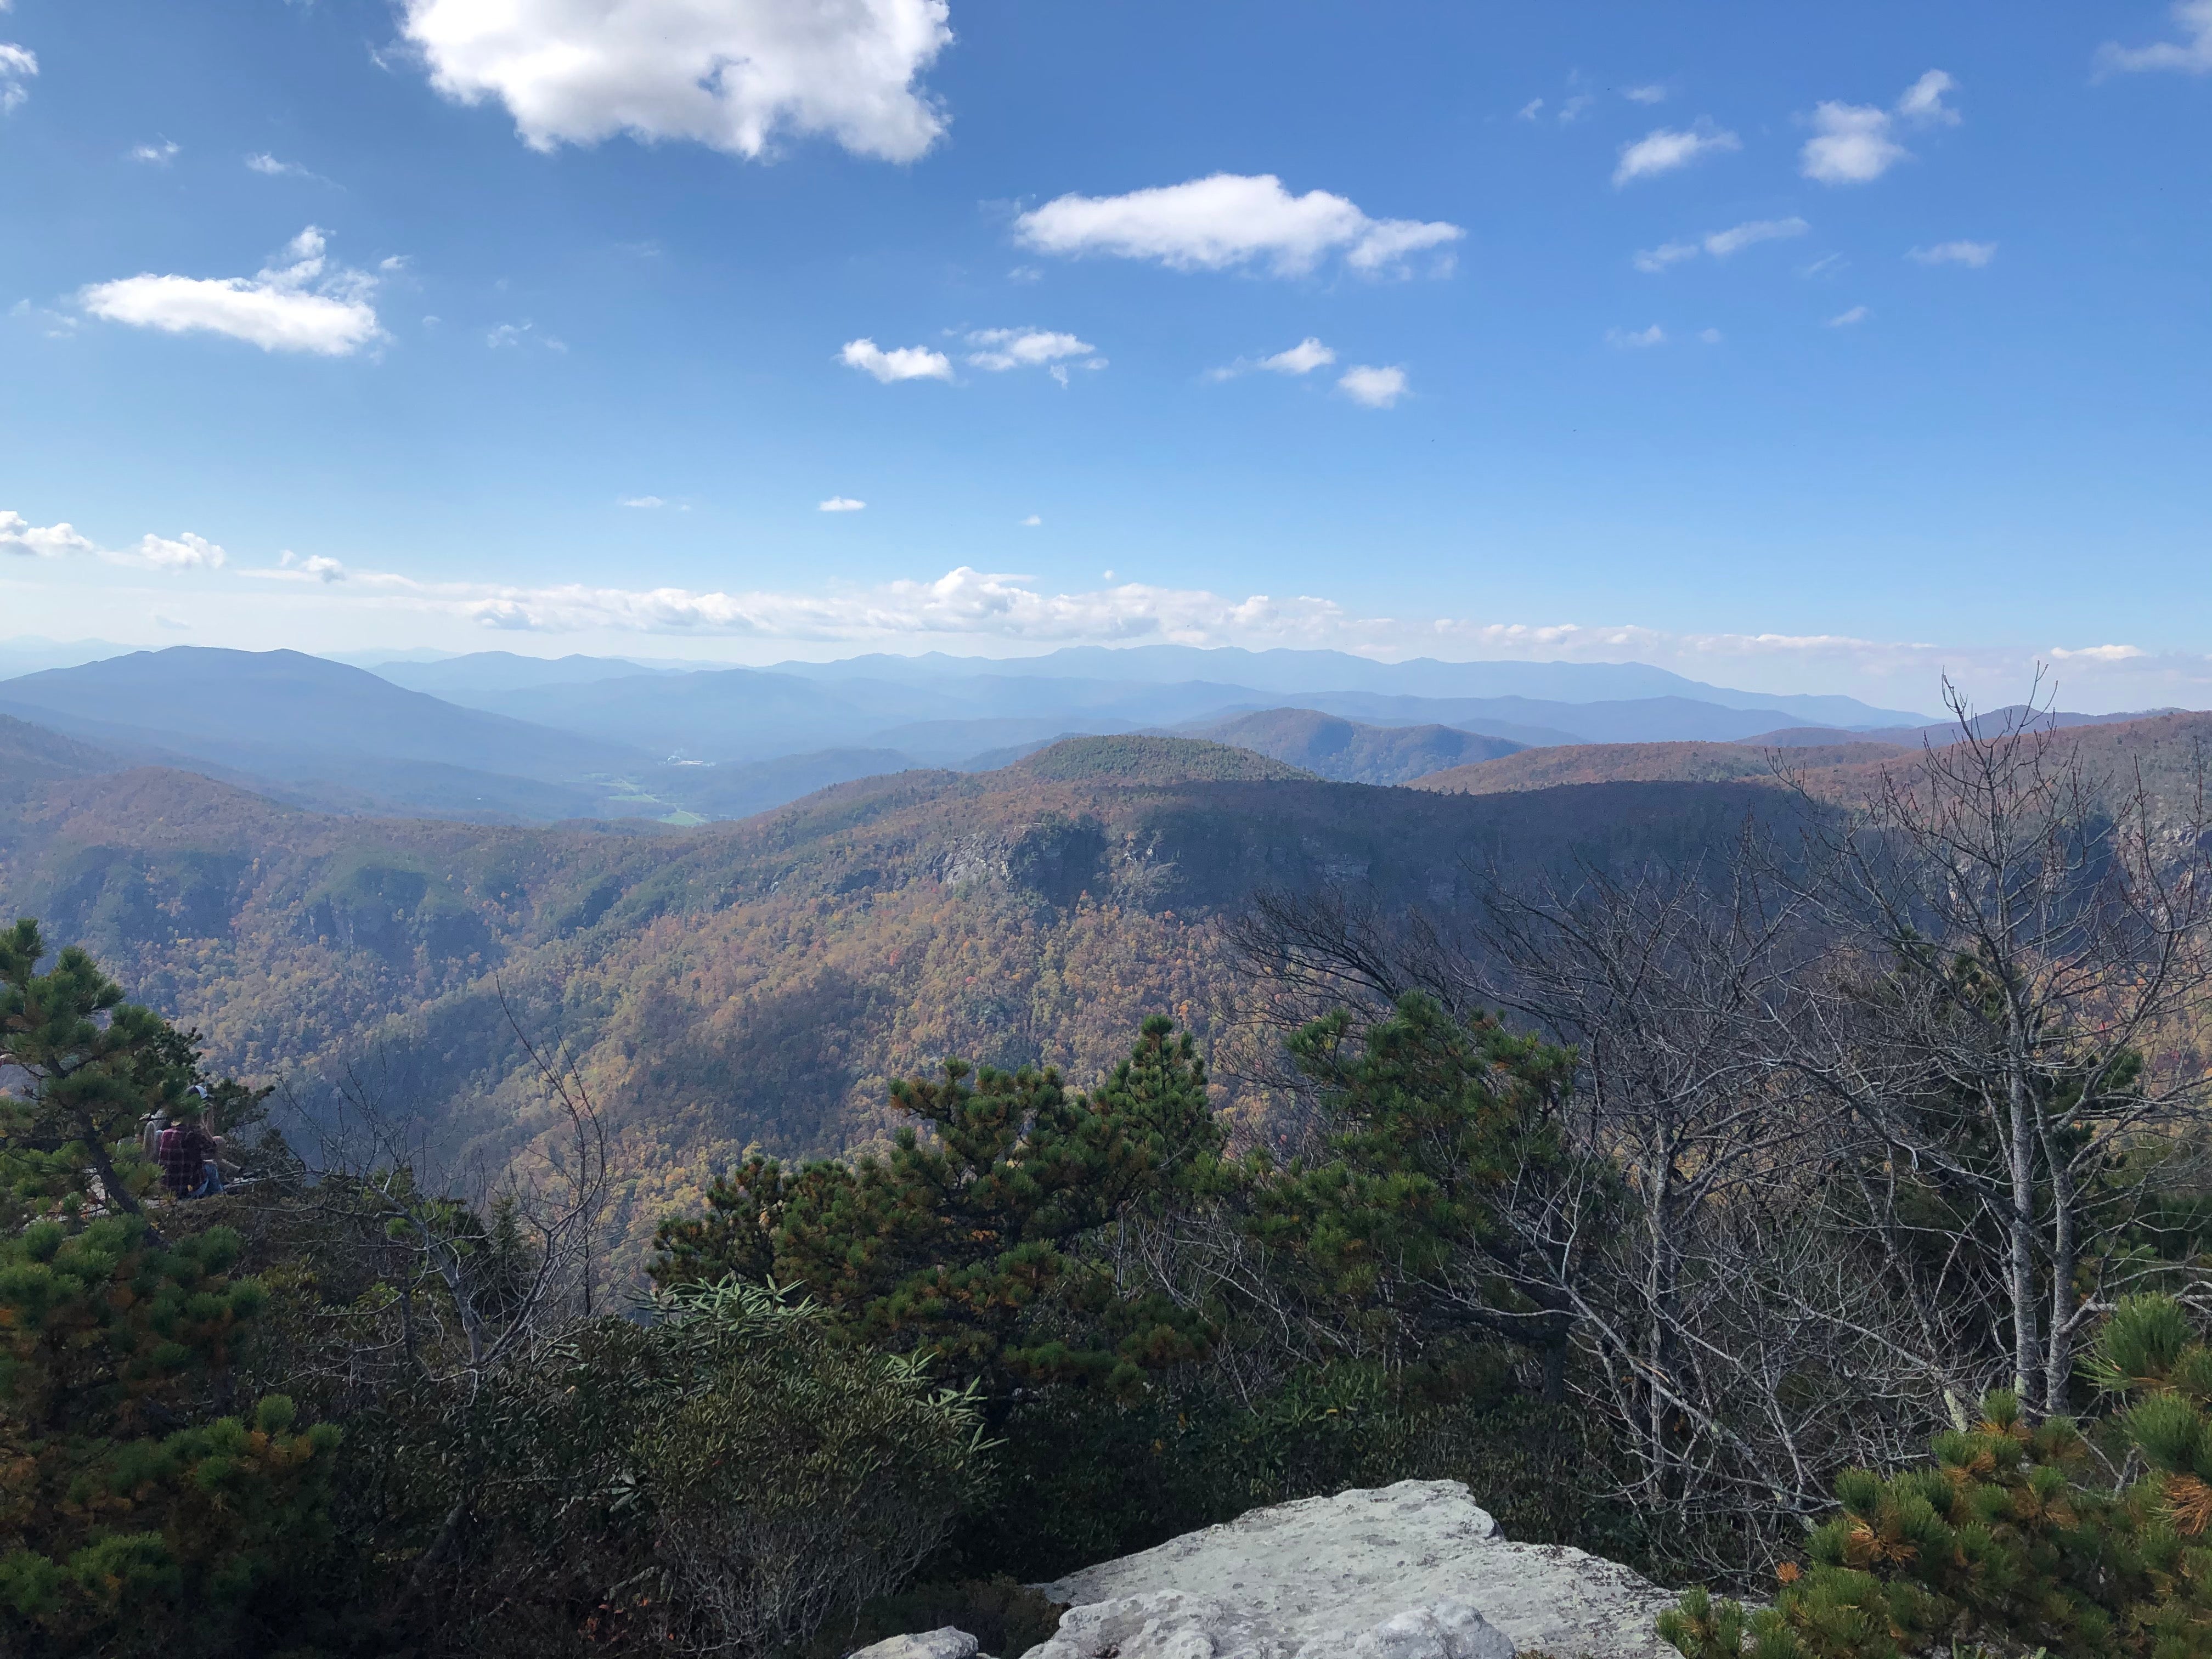 Summit at Hawksbill Mountain - 20 minutes from campground